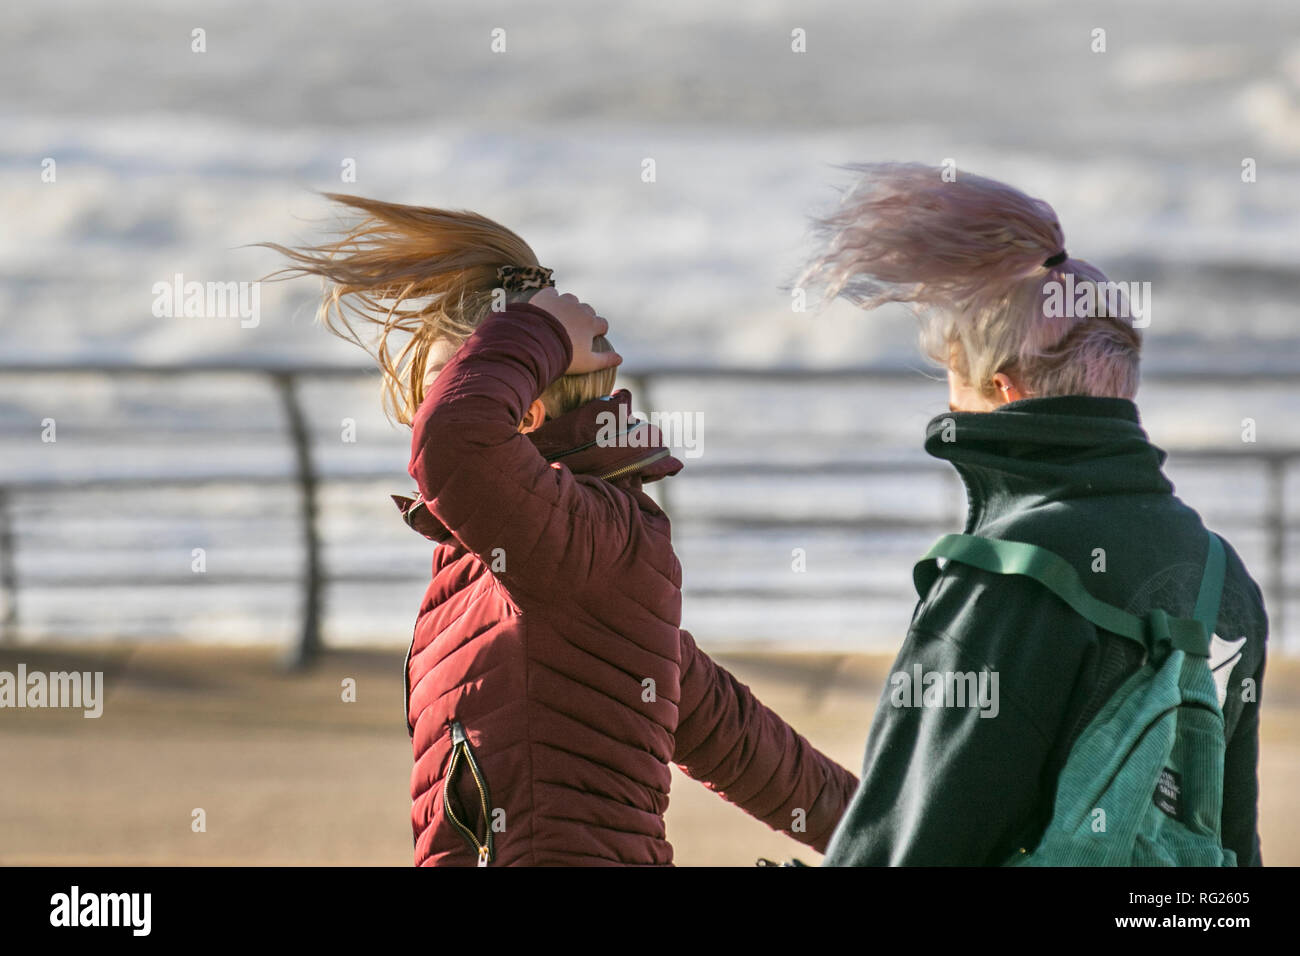 Blackpool, Lancashire. 27th Jan, 2019. UK Weather. Gale force winds at the coast. Visitors to the seaside town have to endure severe winds with pedestrians being blown over on the seafront promenade. Storm , blow, tempest, flyaway hair, tangled tresses, bad hair day on the seafront promenade.Credit:MediaWorldImages/AlamyLiveNews Stock Photo